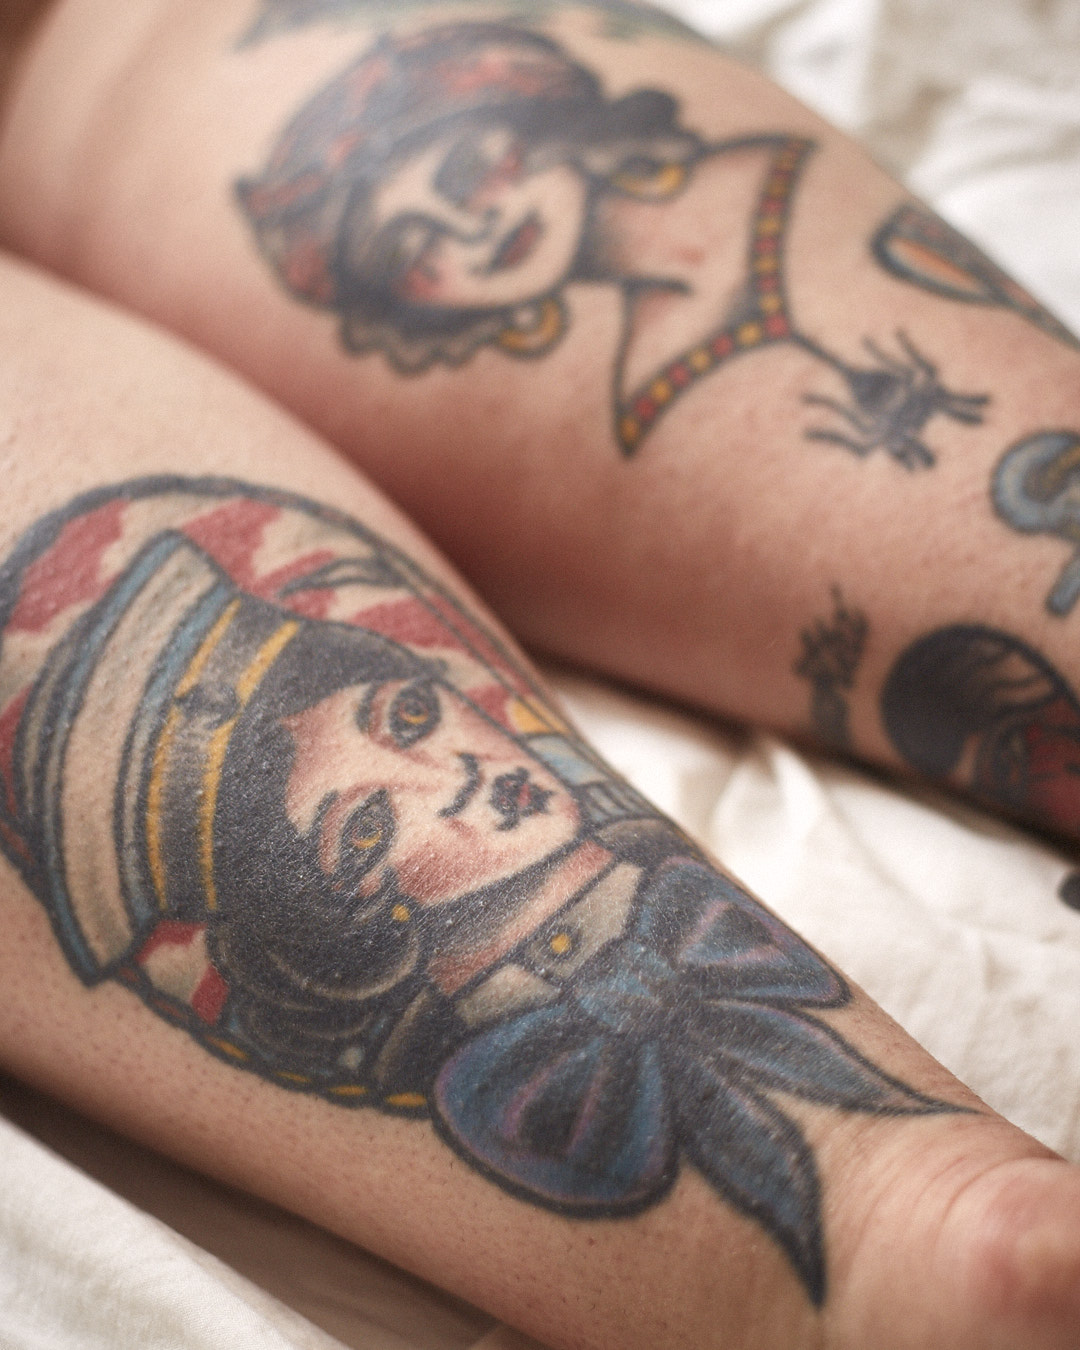 tattooed women Archives - Things&Ink